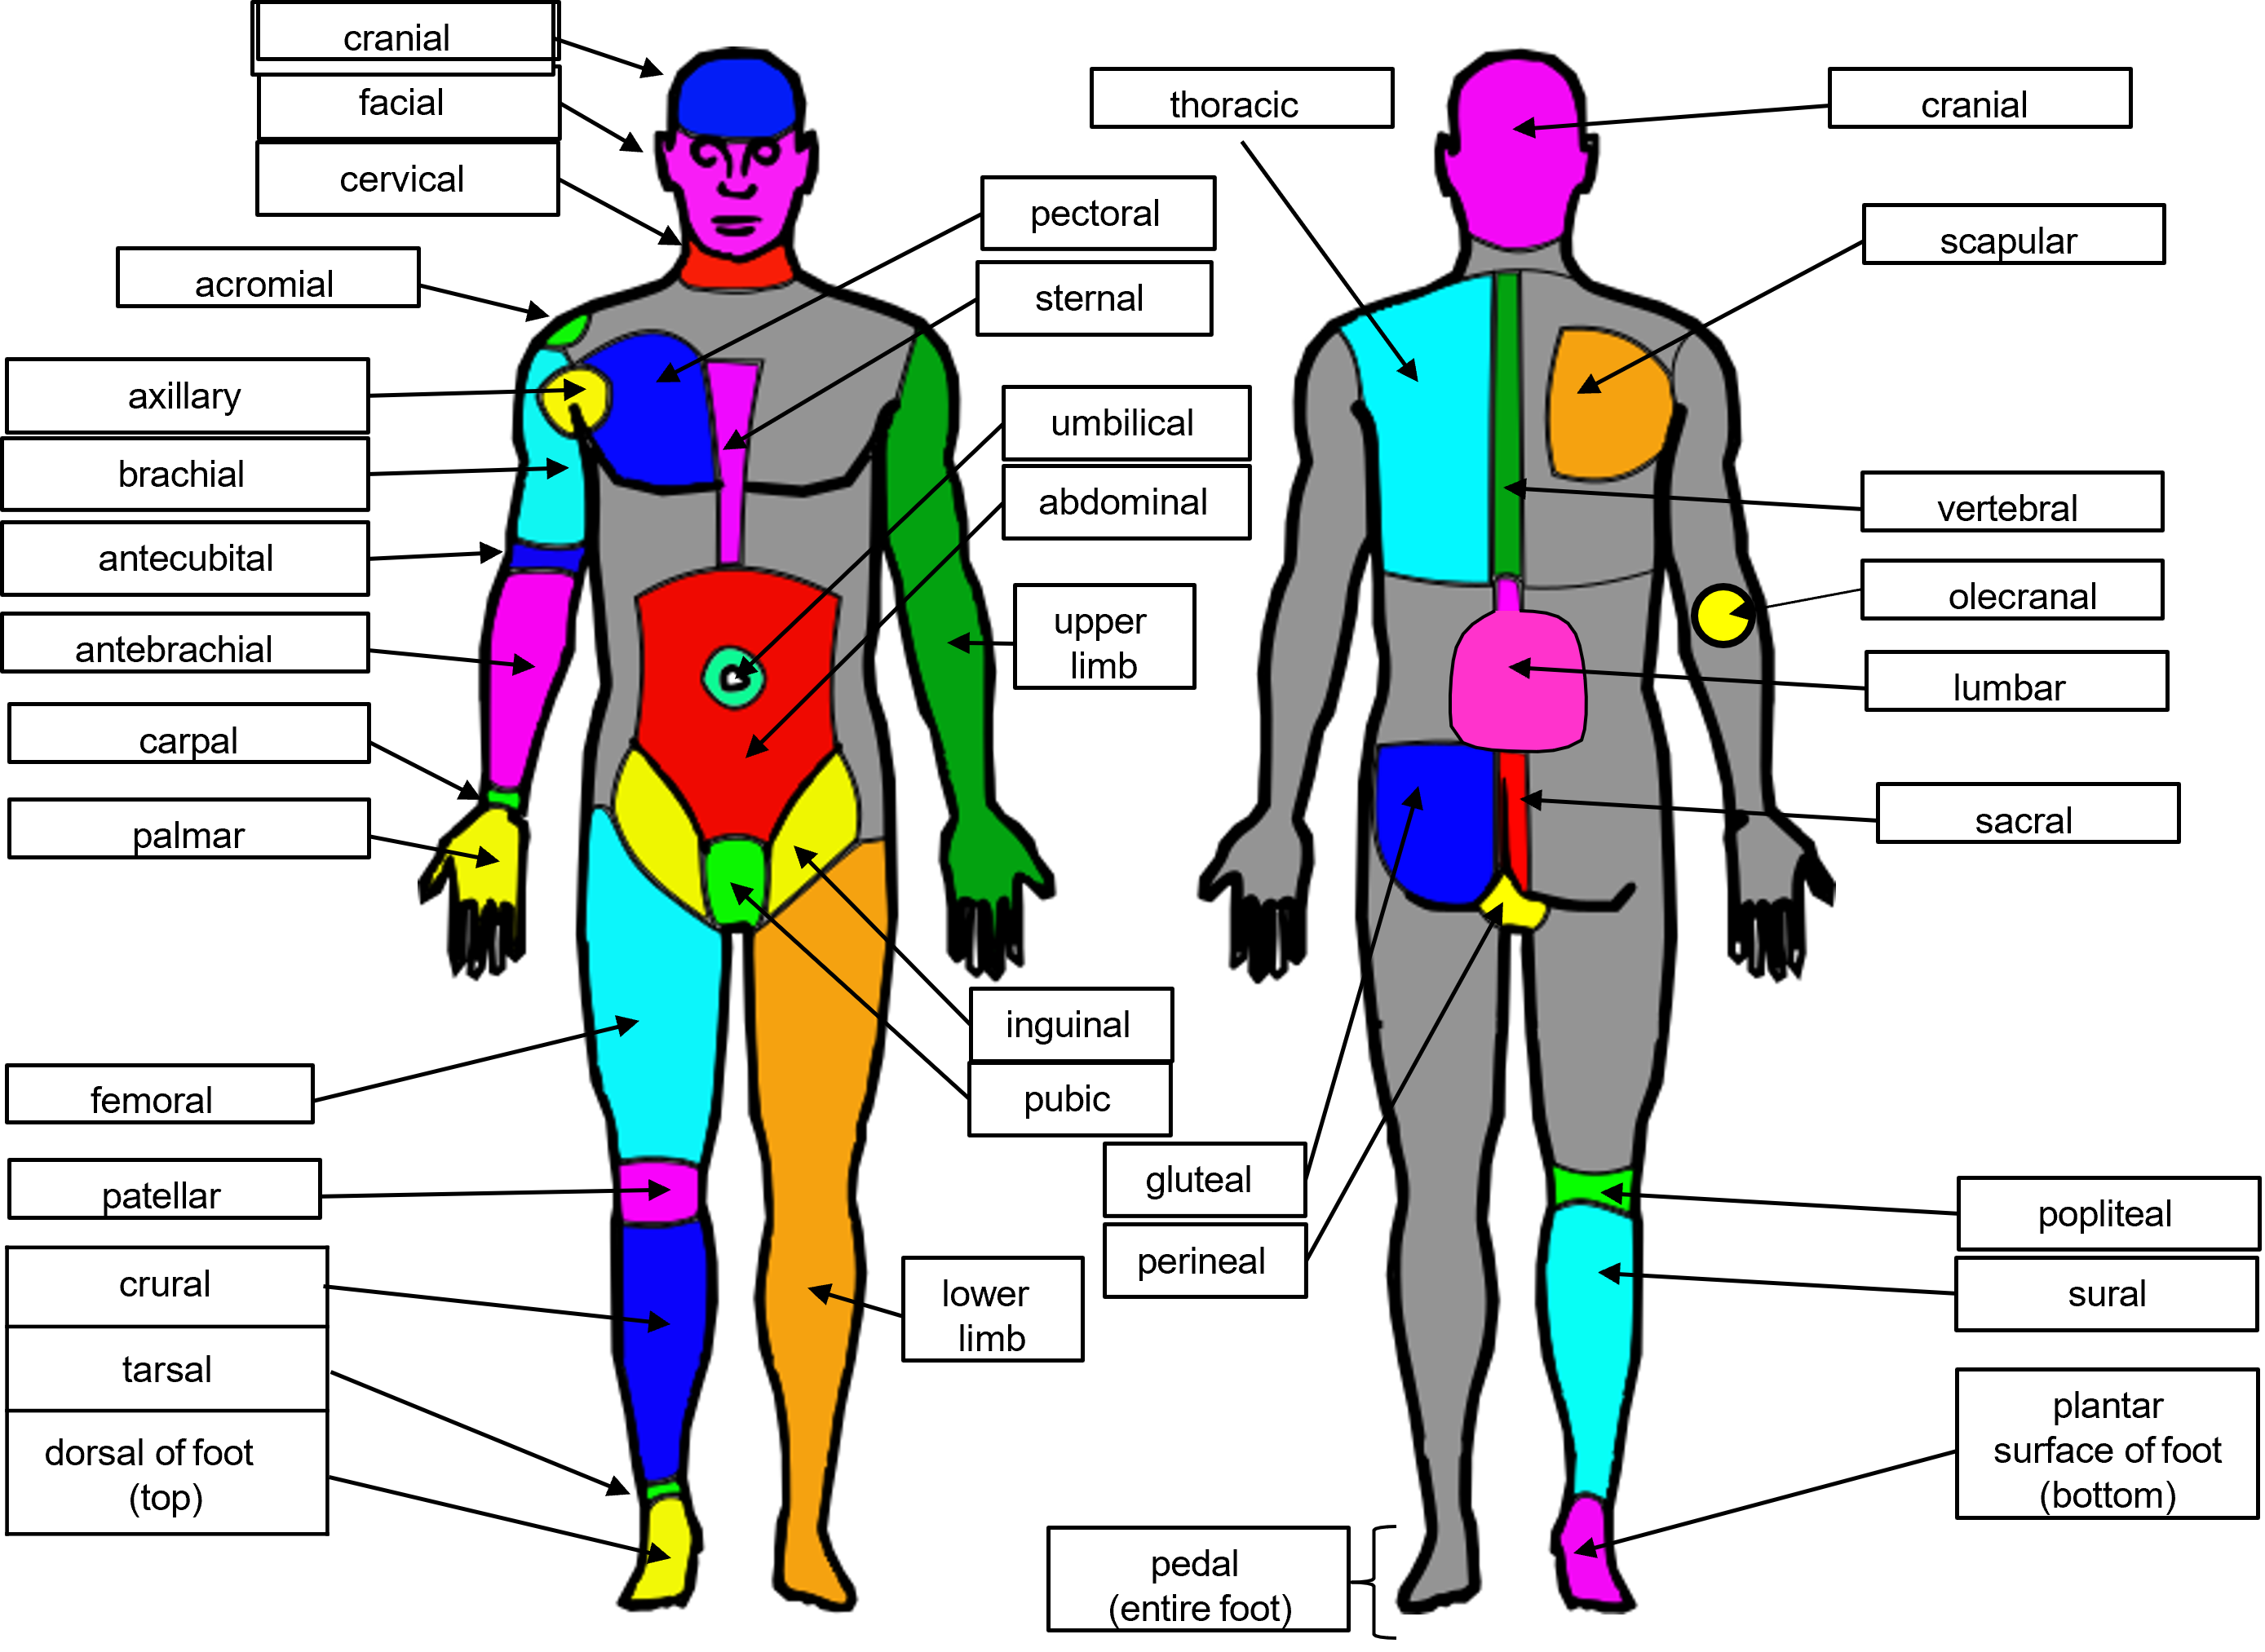 Human figure showing the locations of the anatomical adjectives.